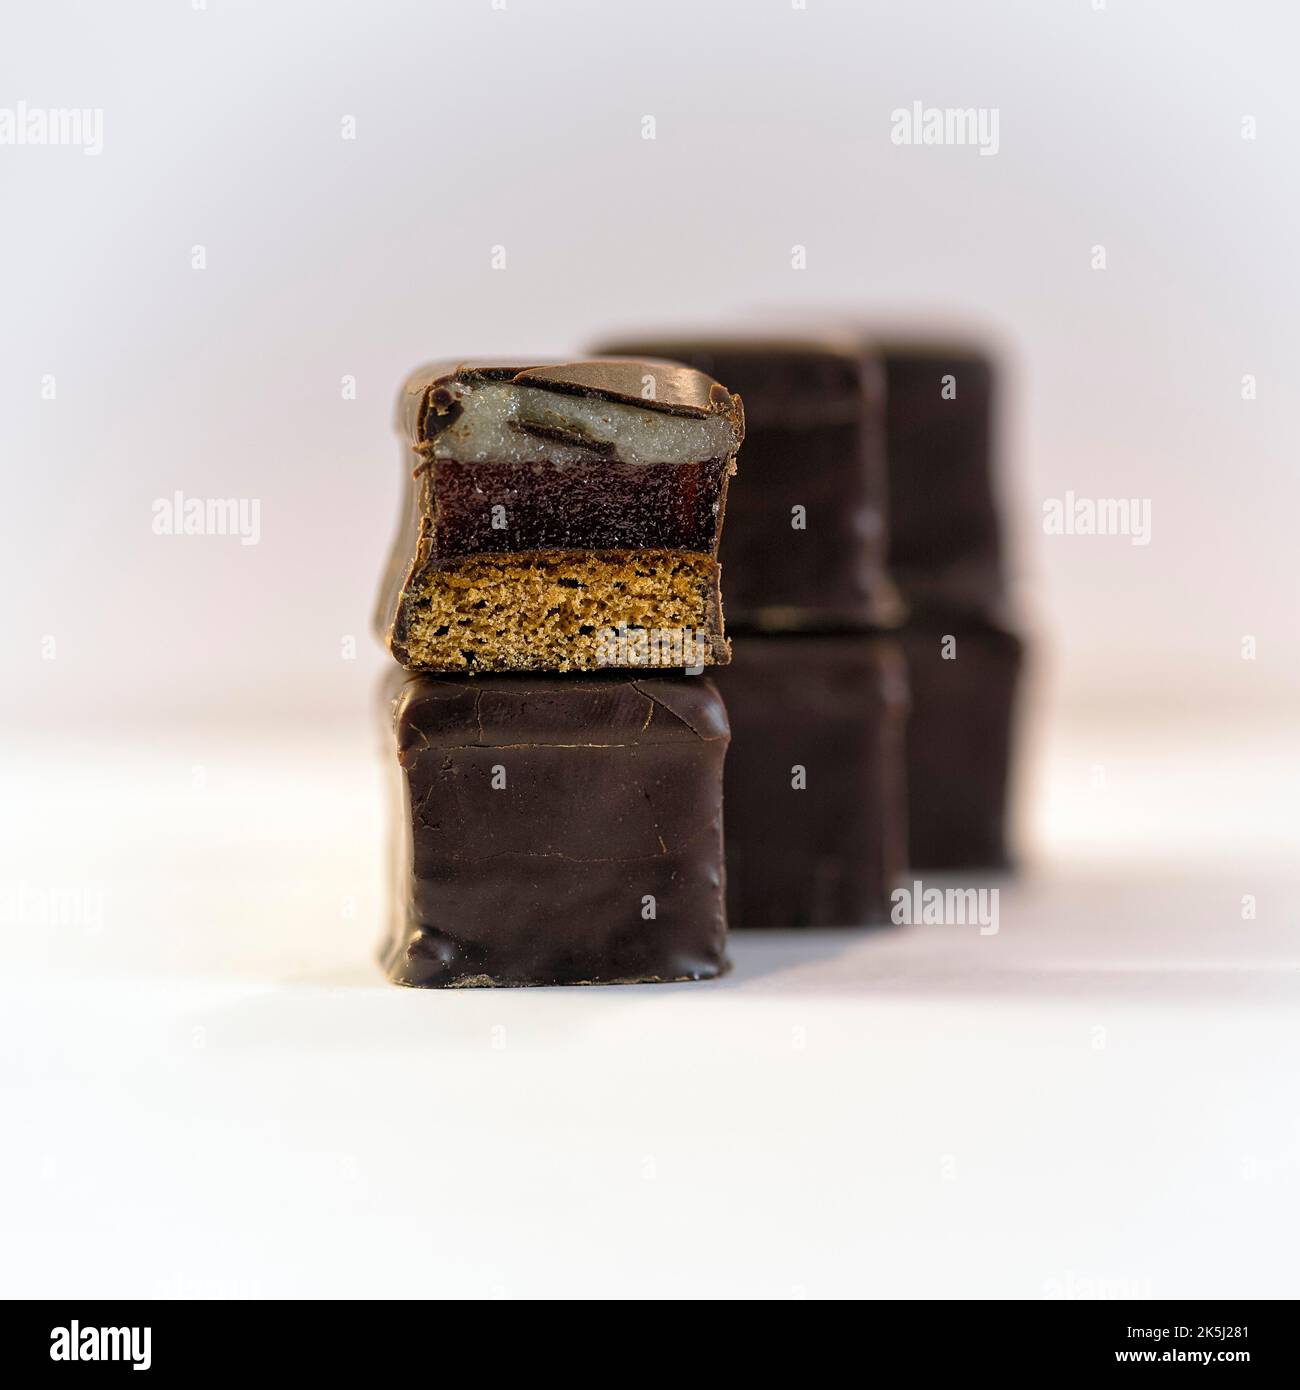 Dominos in a row, stacked, Christmas sweet with layers of marzipan, gingerbread and dark chocolate icing, half, close-up Stock Photo